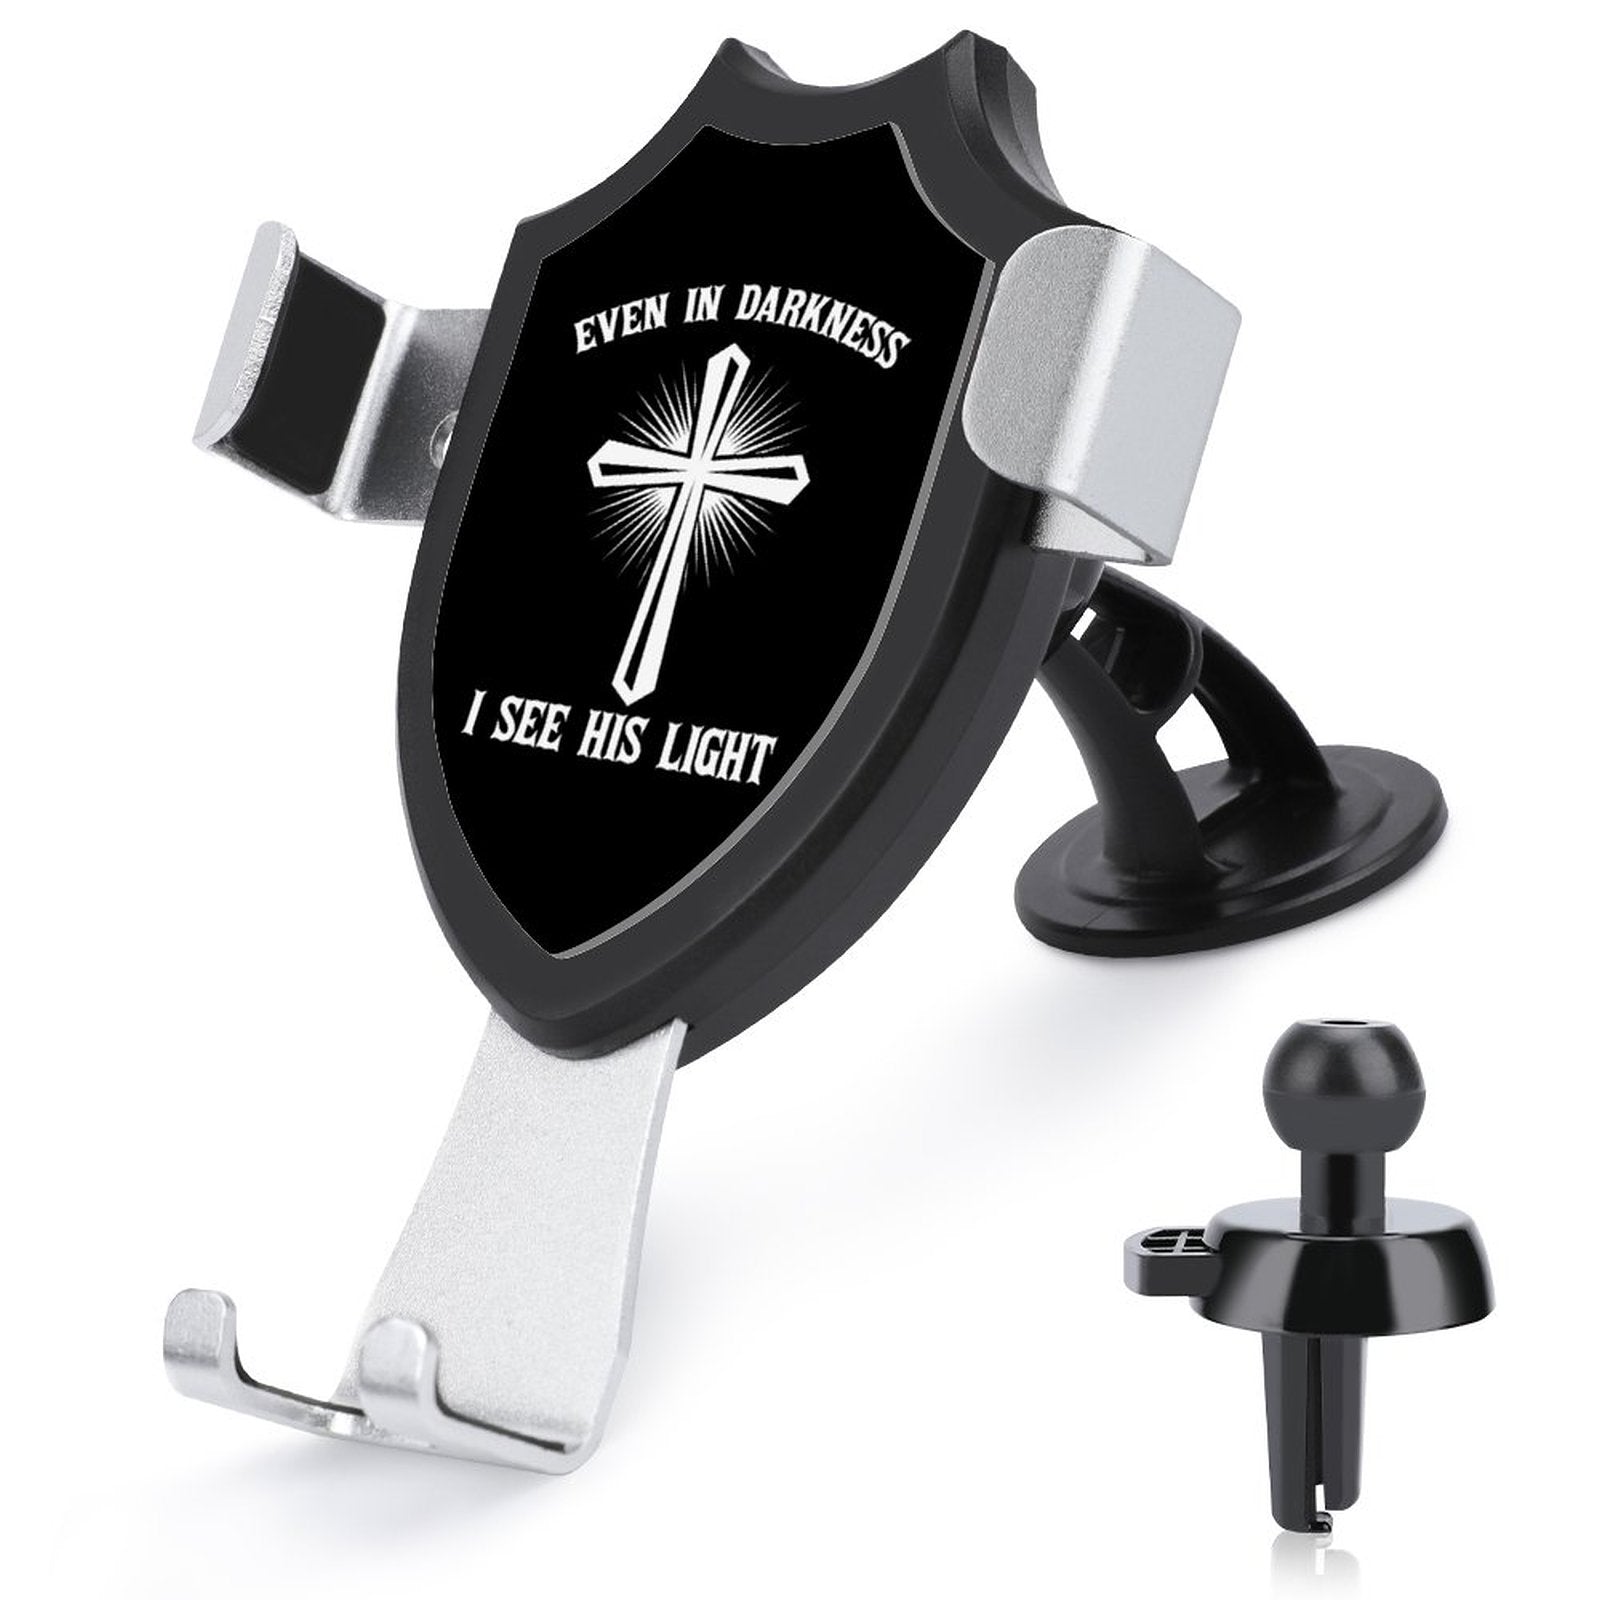 Even In Darkness I See His Light Christian Car Mount Mobile Phone Holder SALE-Personal Design